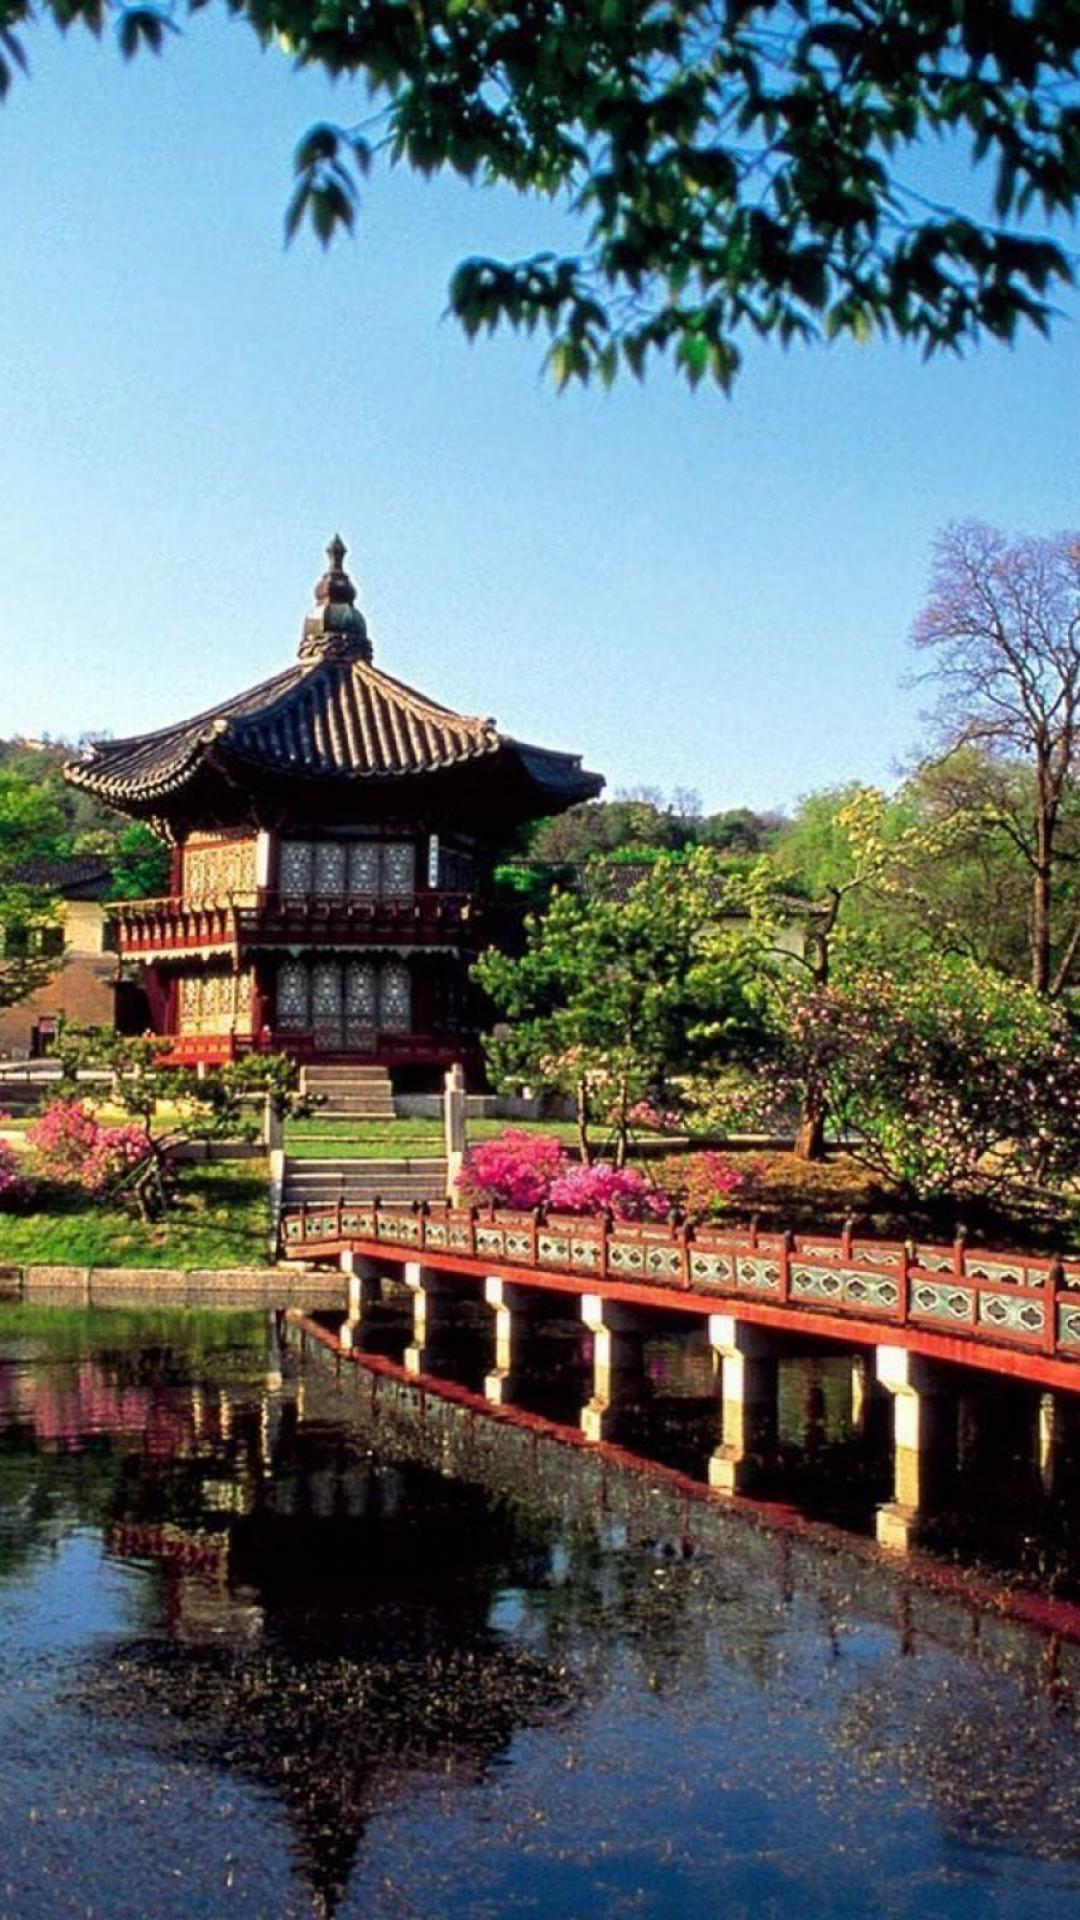 seoul wallpaper iphone,chinese architecture,natural landscape,architecture,japanese architecture,water